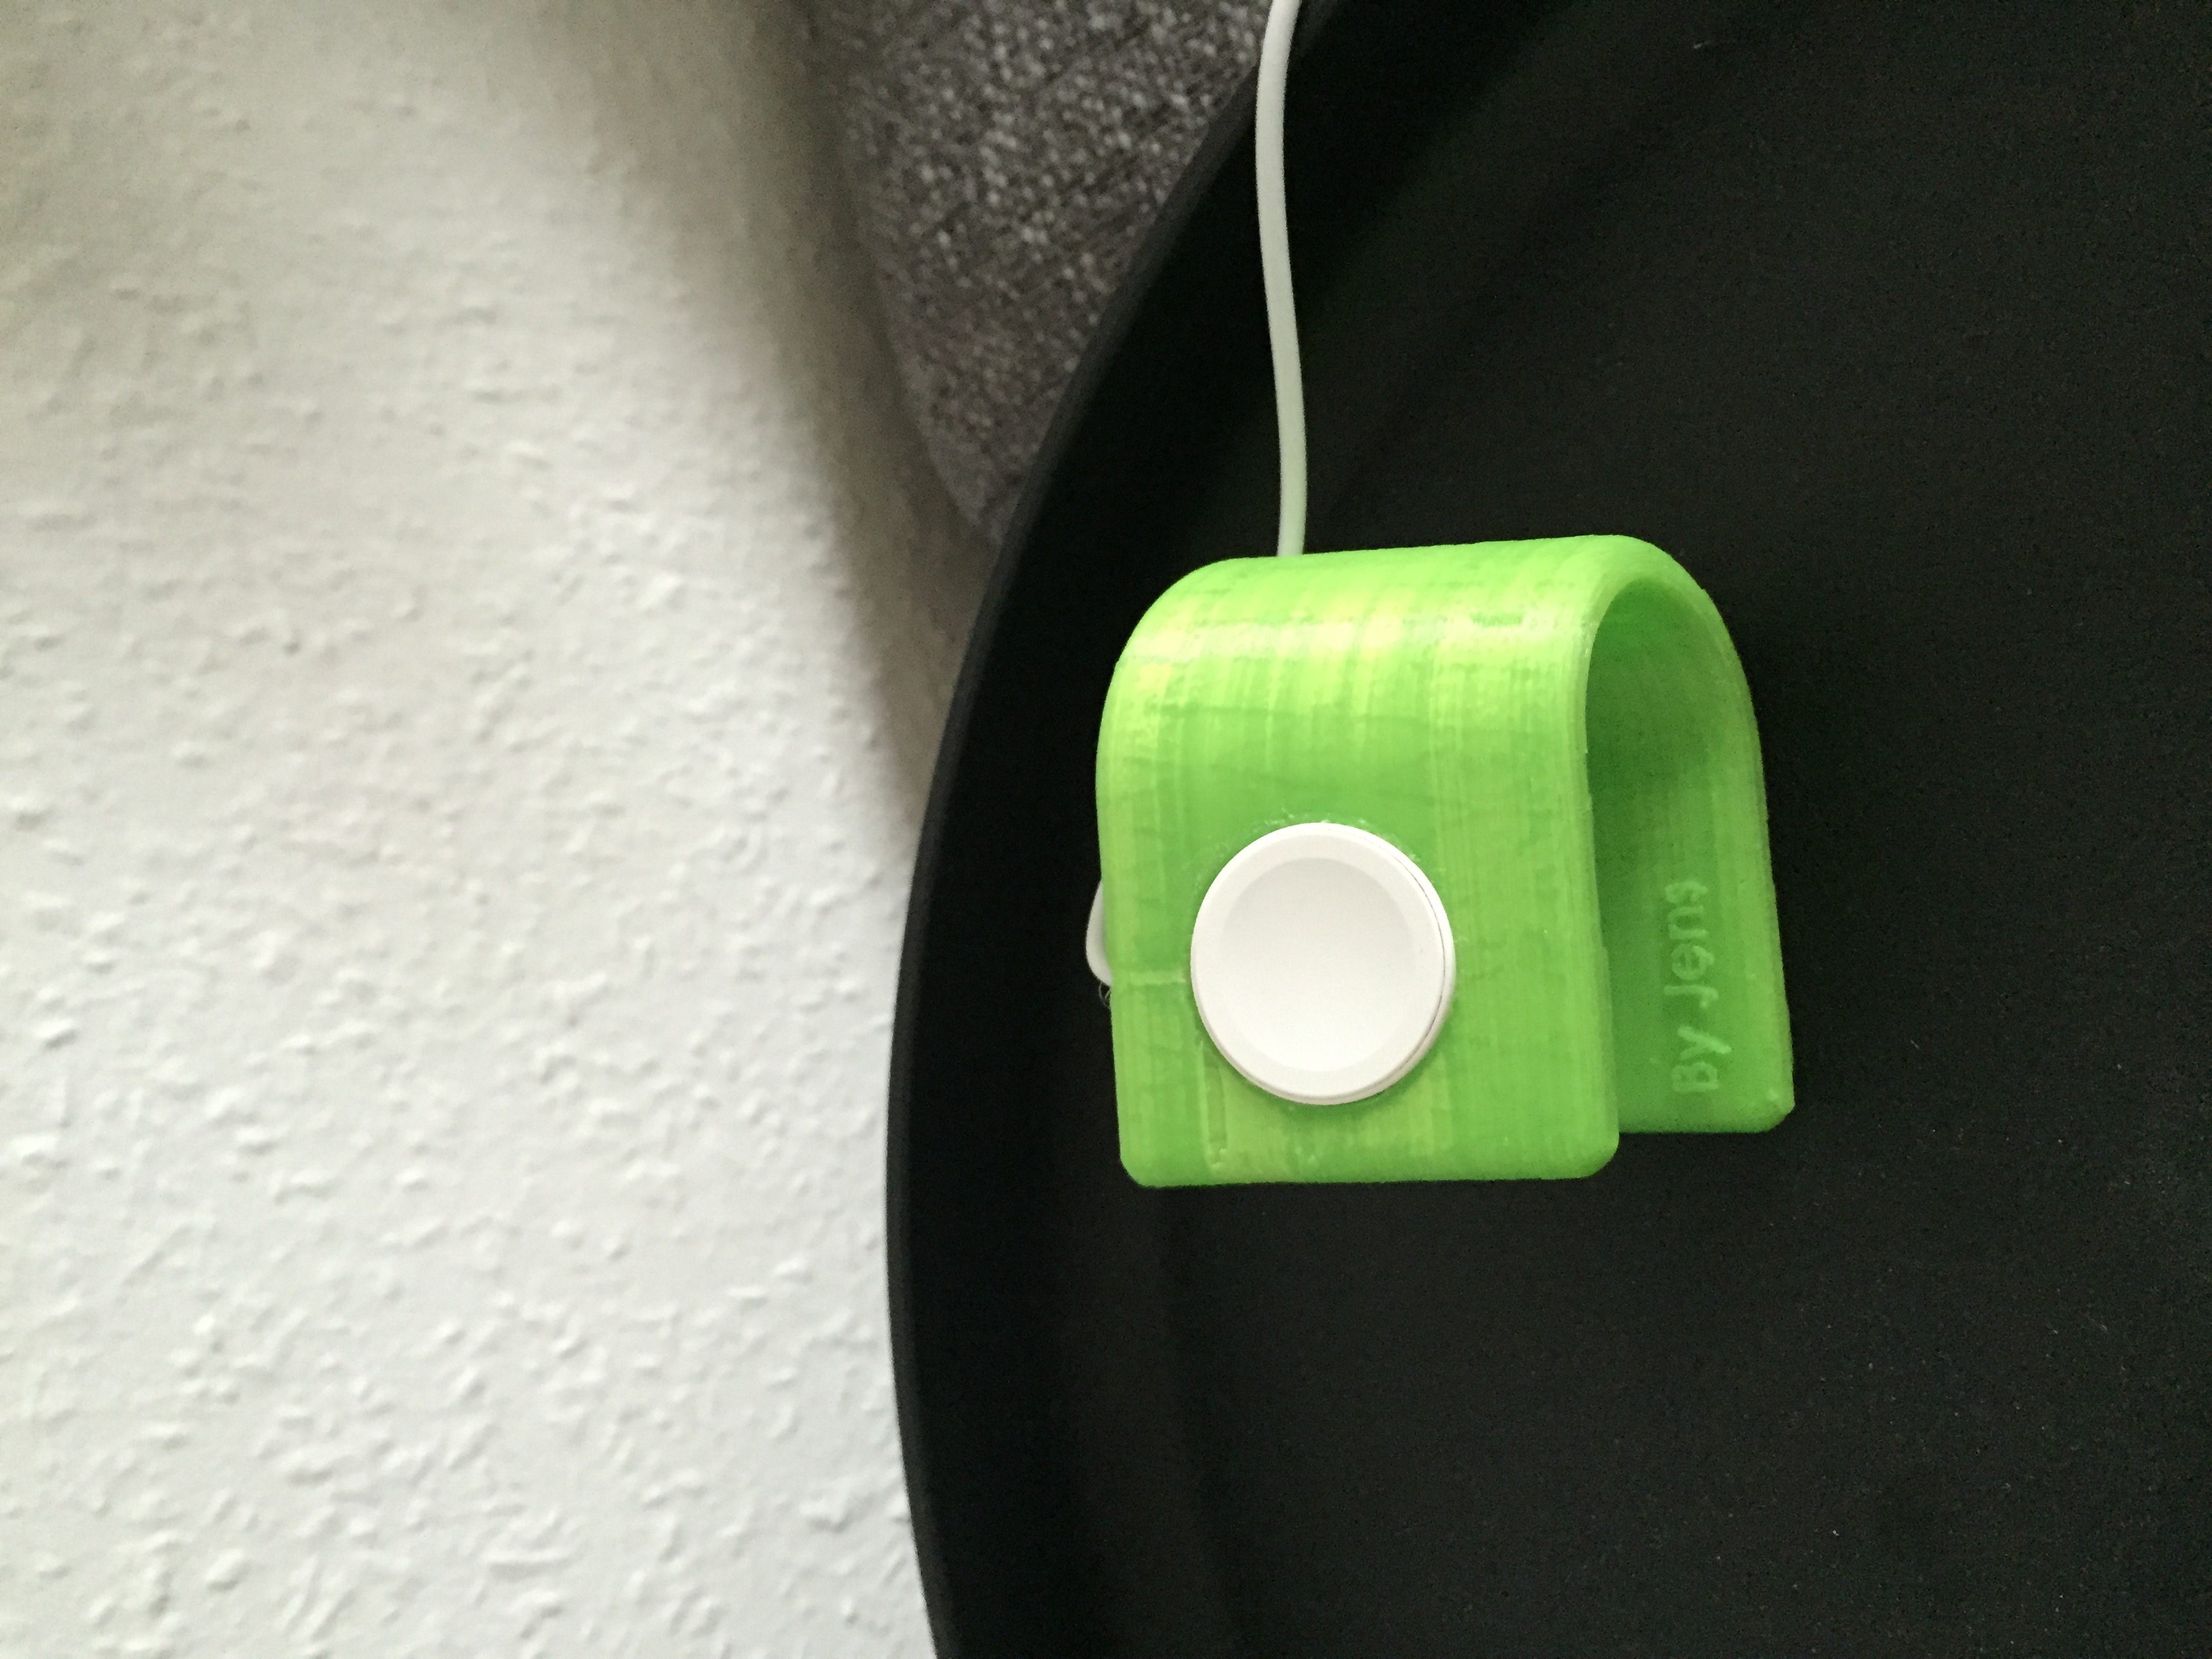 Applewatch chargestand